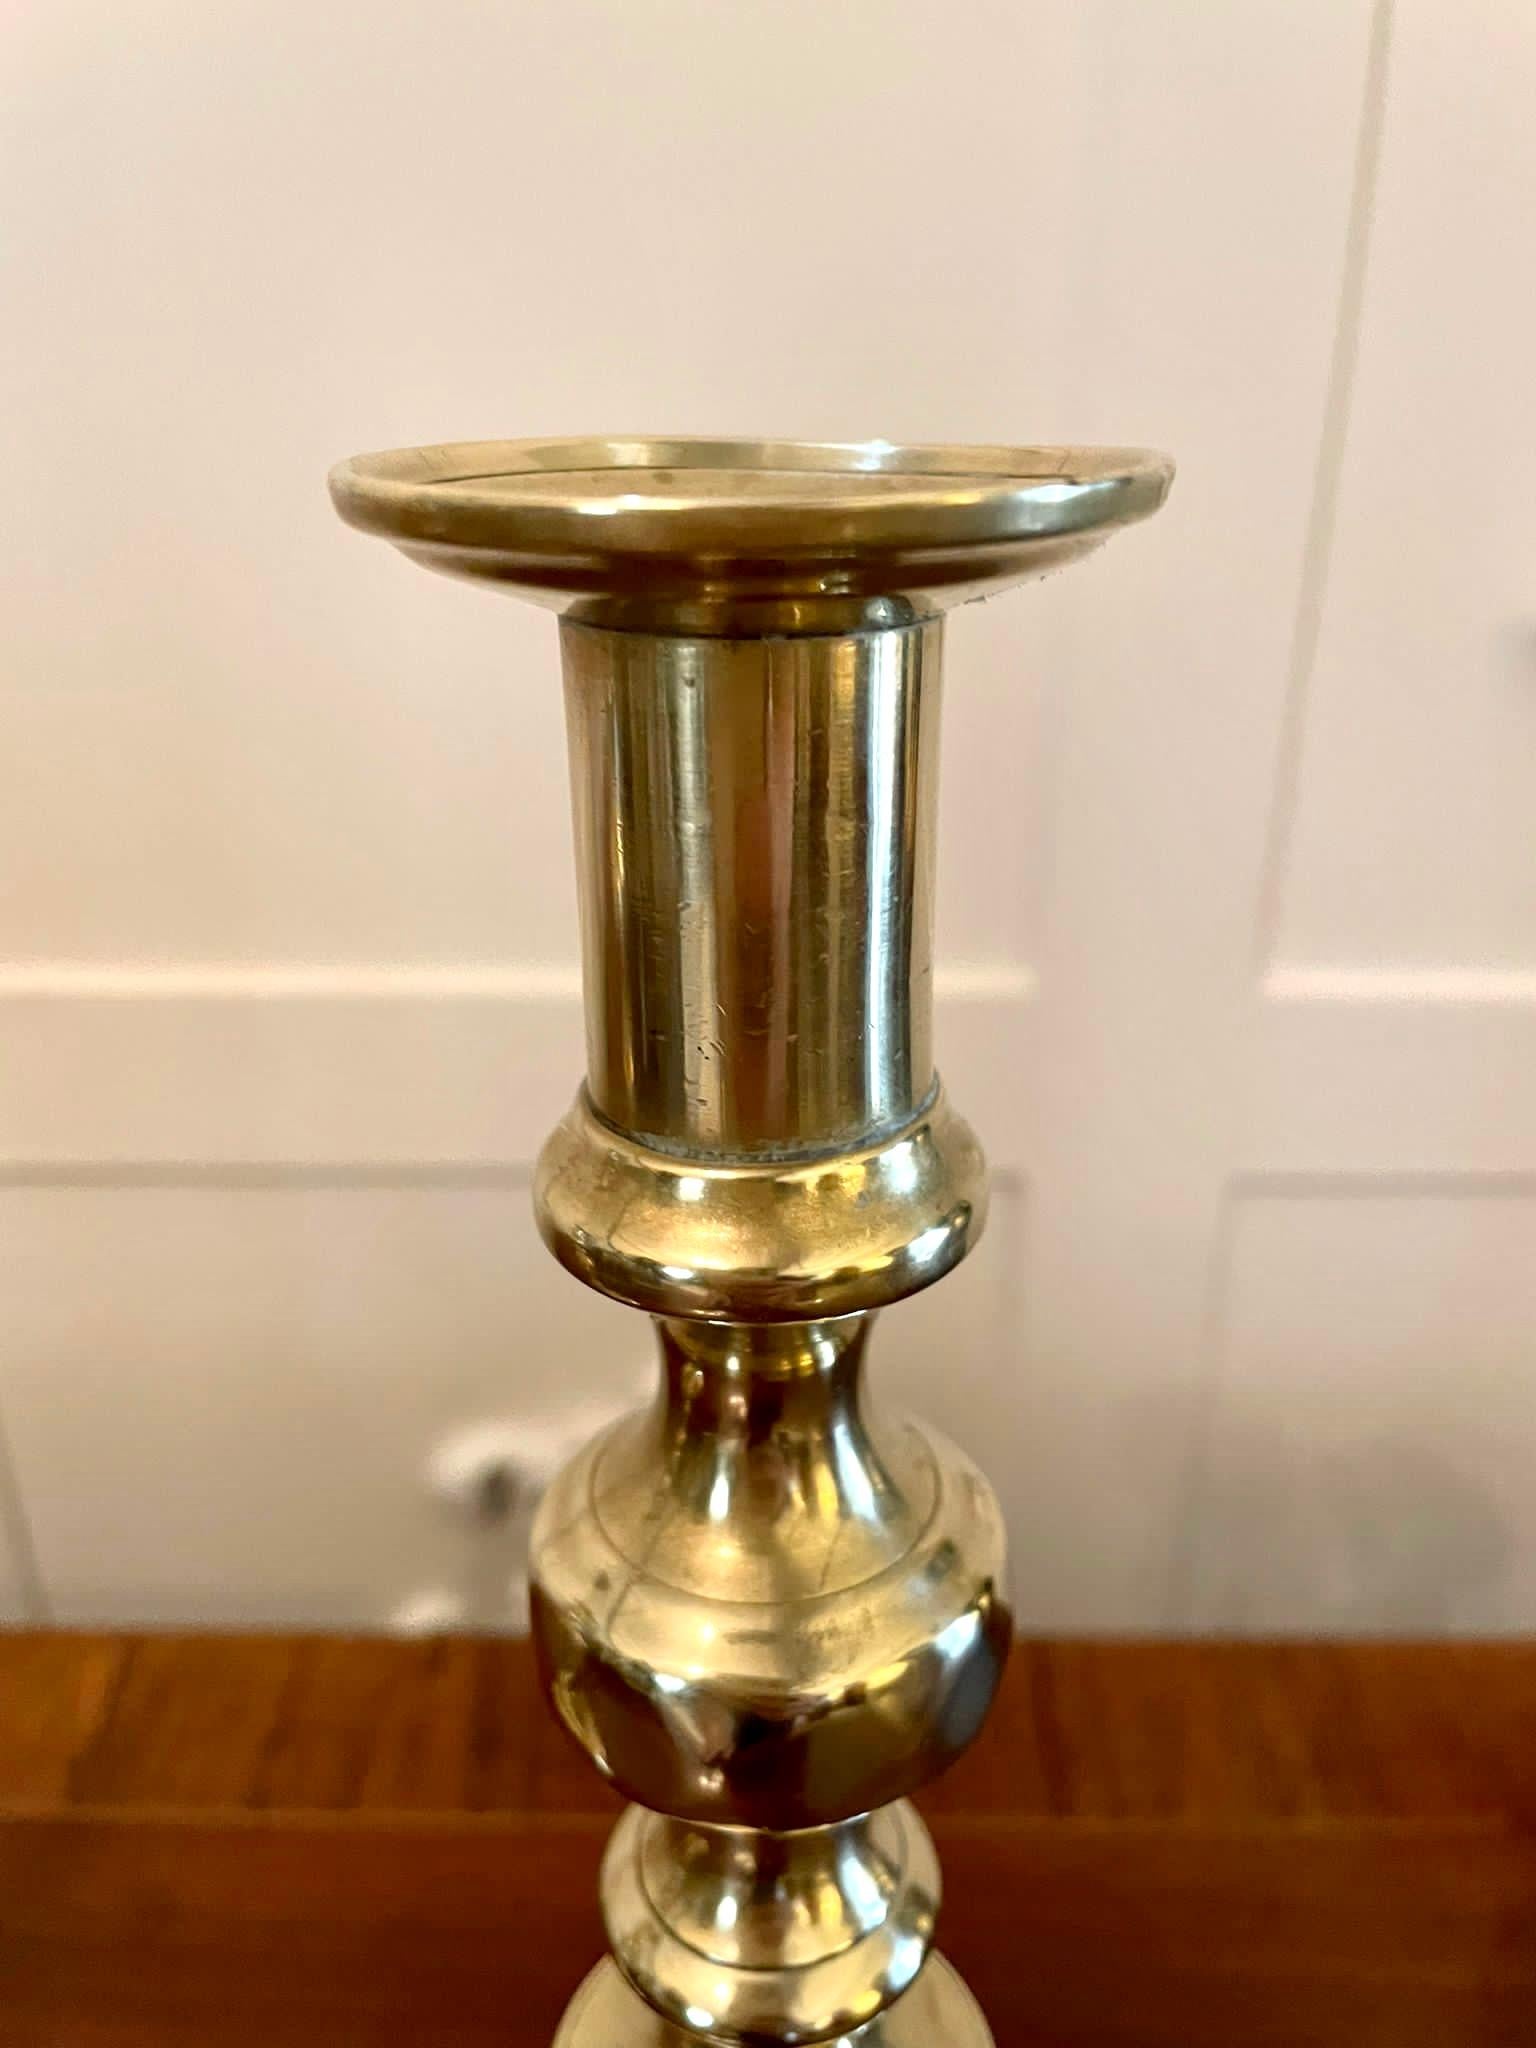 Pair of antique Victorian brass candlesticks having a beehive and diamond shaped column raised on a square stepped base.

In lovely original condition.

H 27.5cm 
W 9.5cm 
D 9.5cm
Date 1860
NO 3.